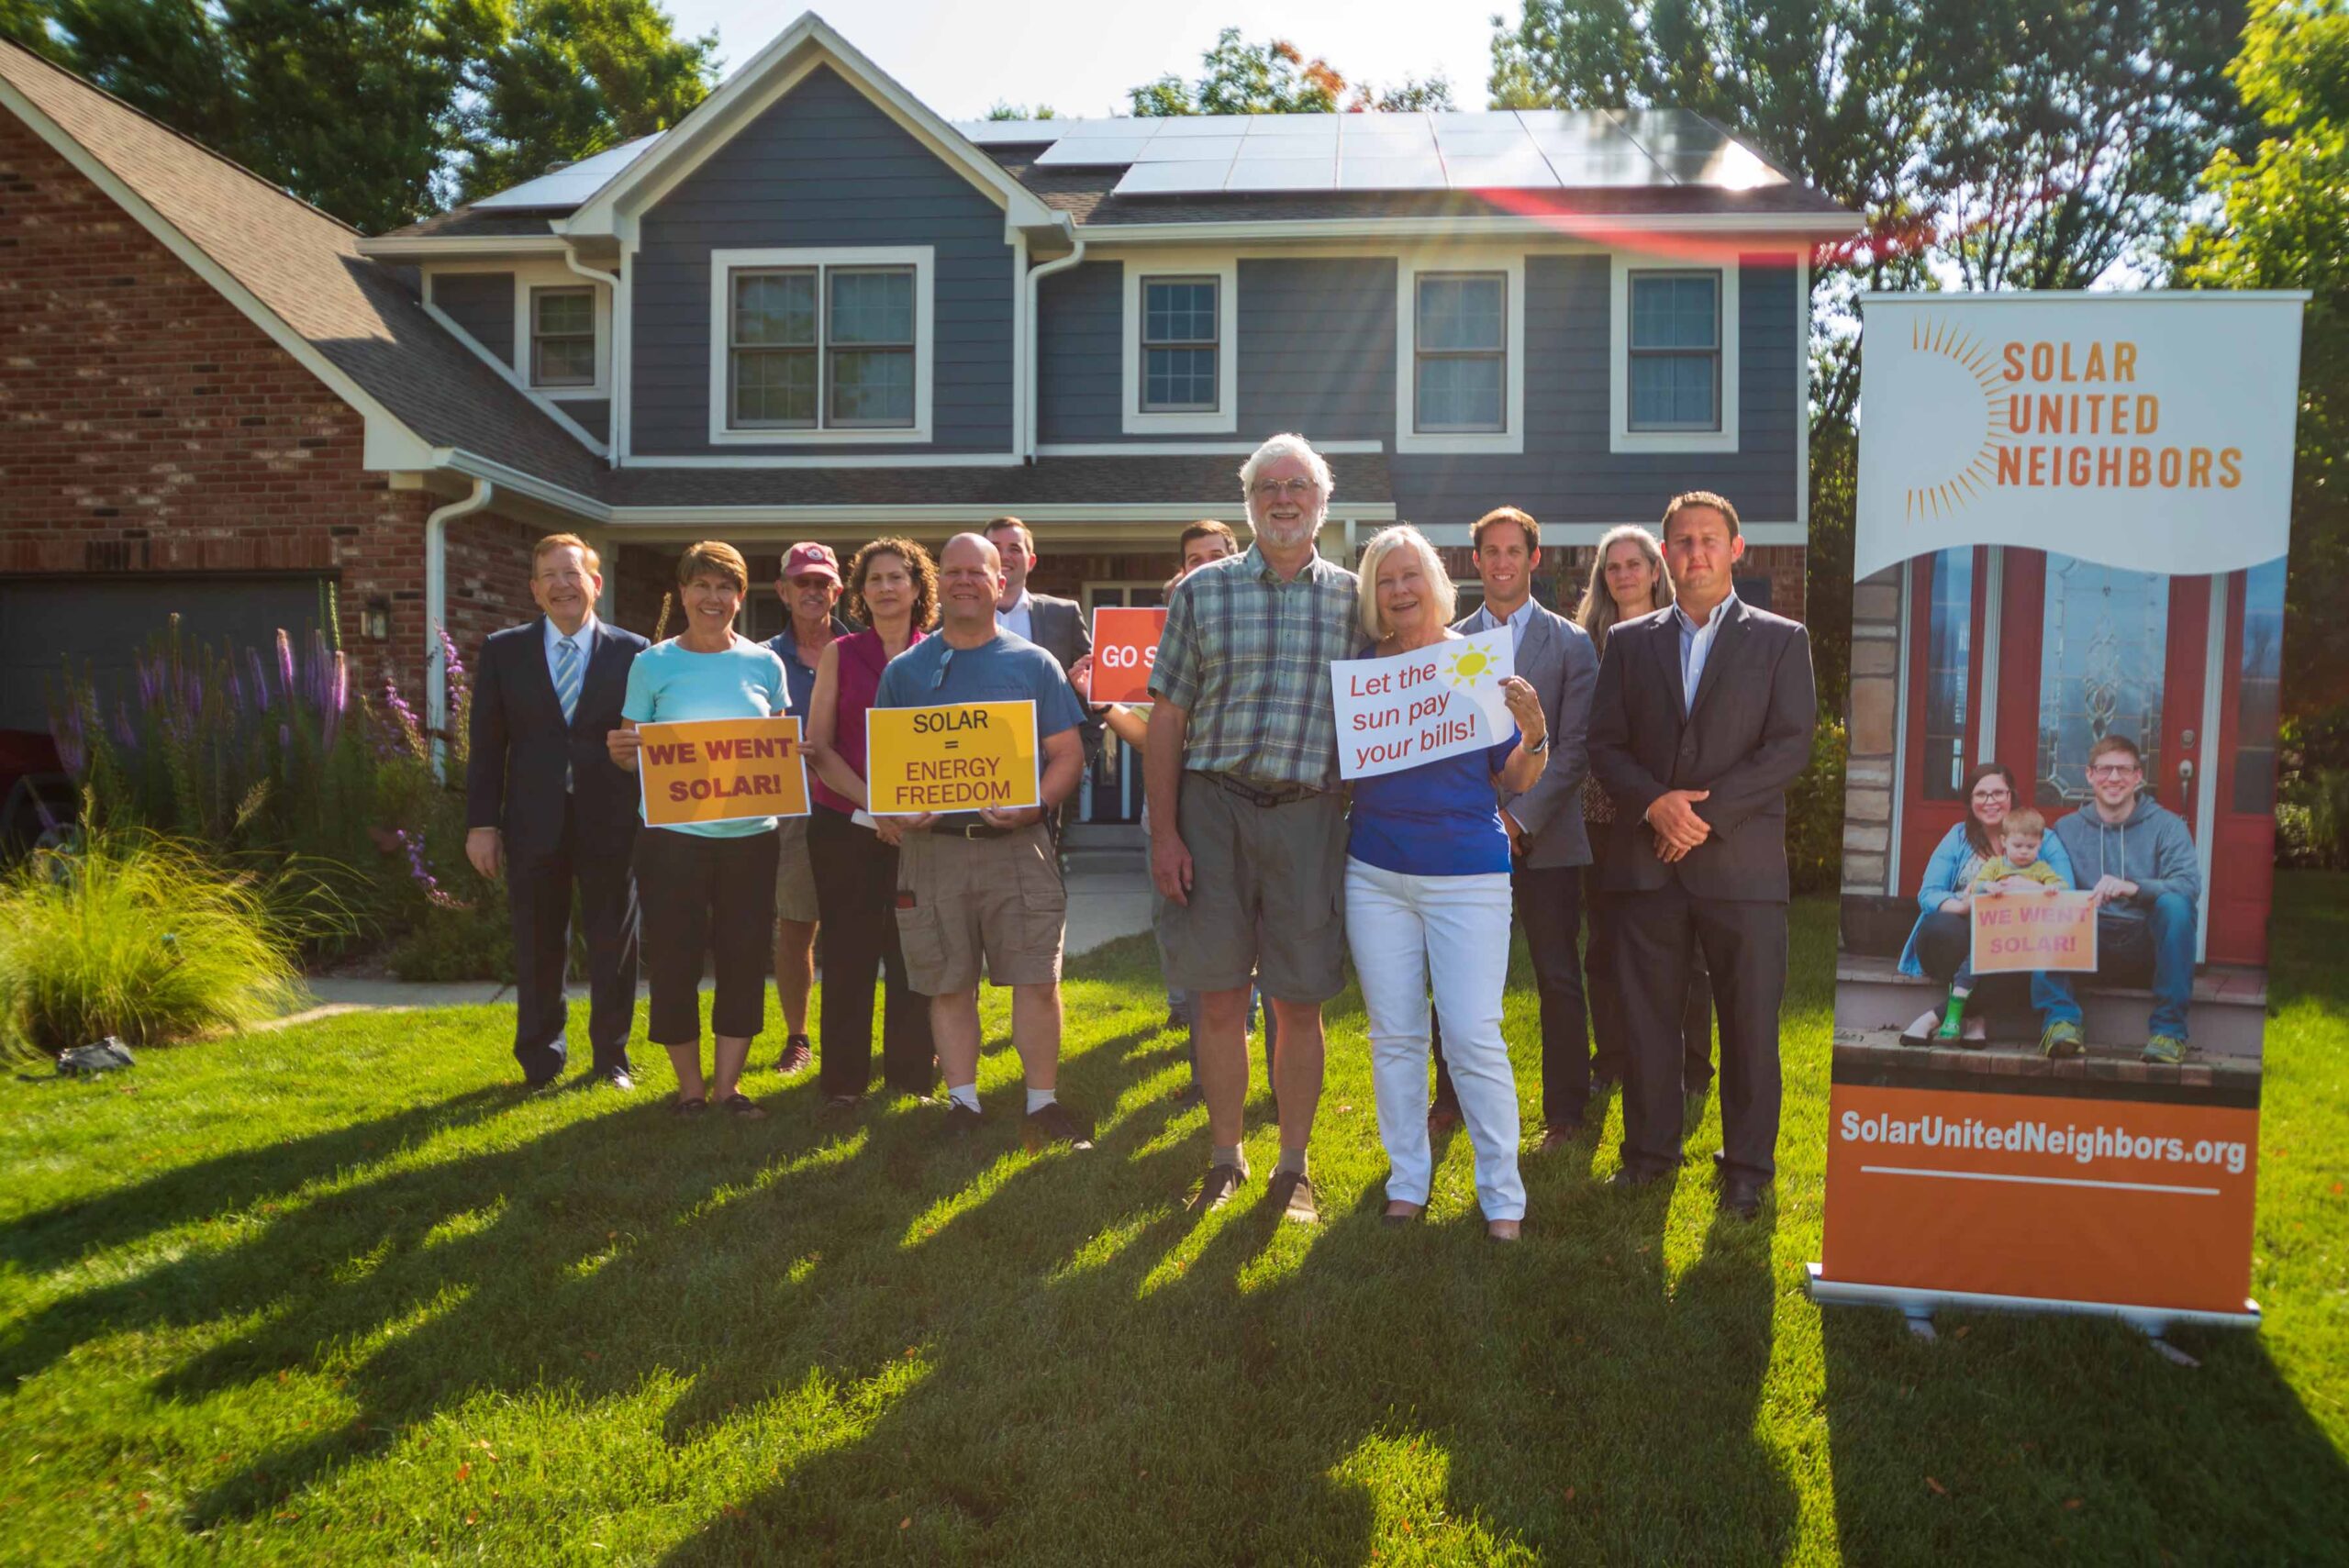 Group of people standing in front of a house with rooftop solar panels.